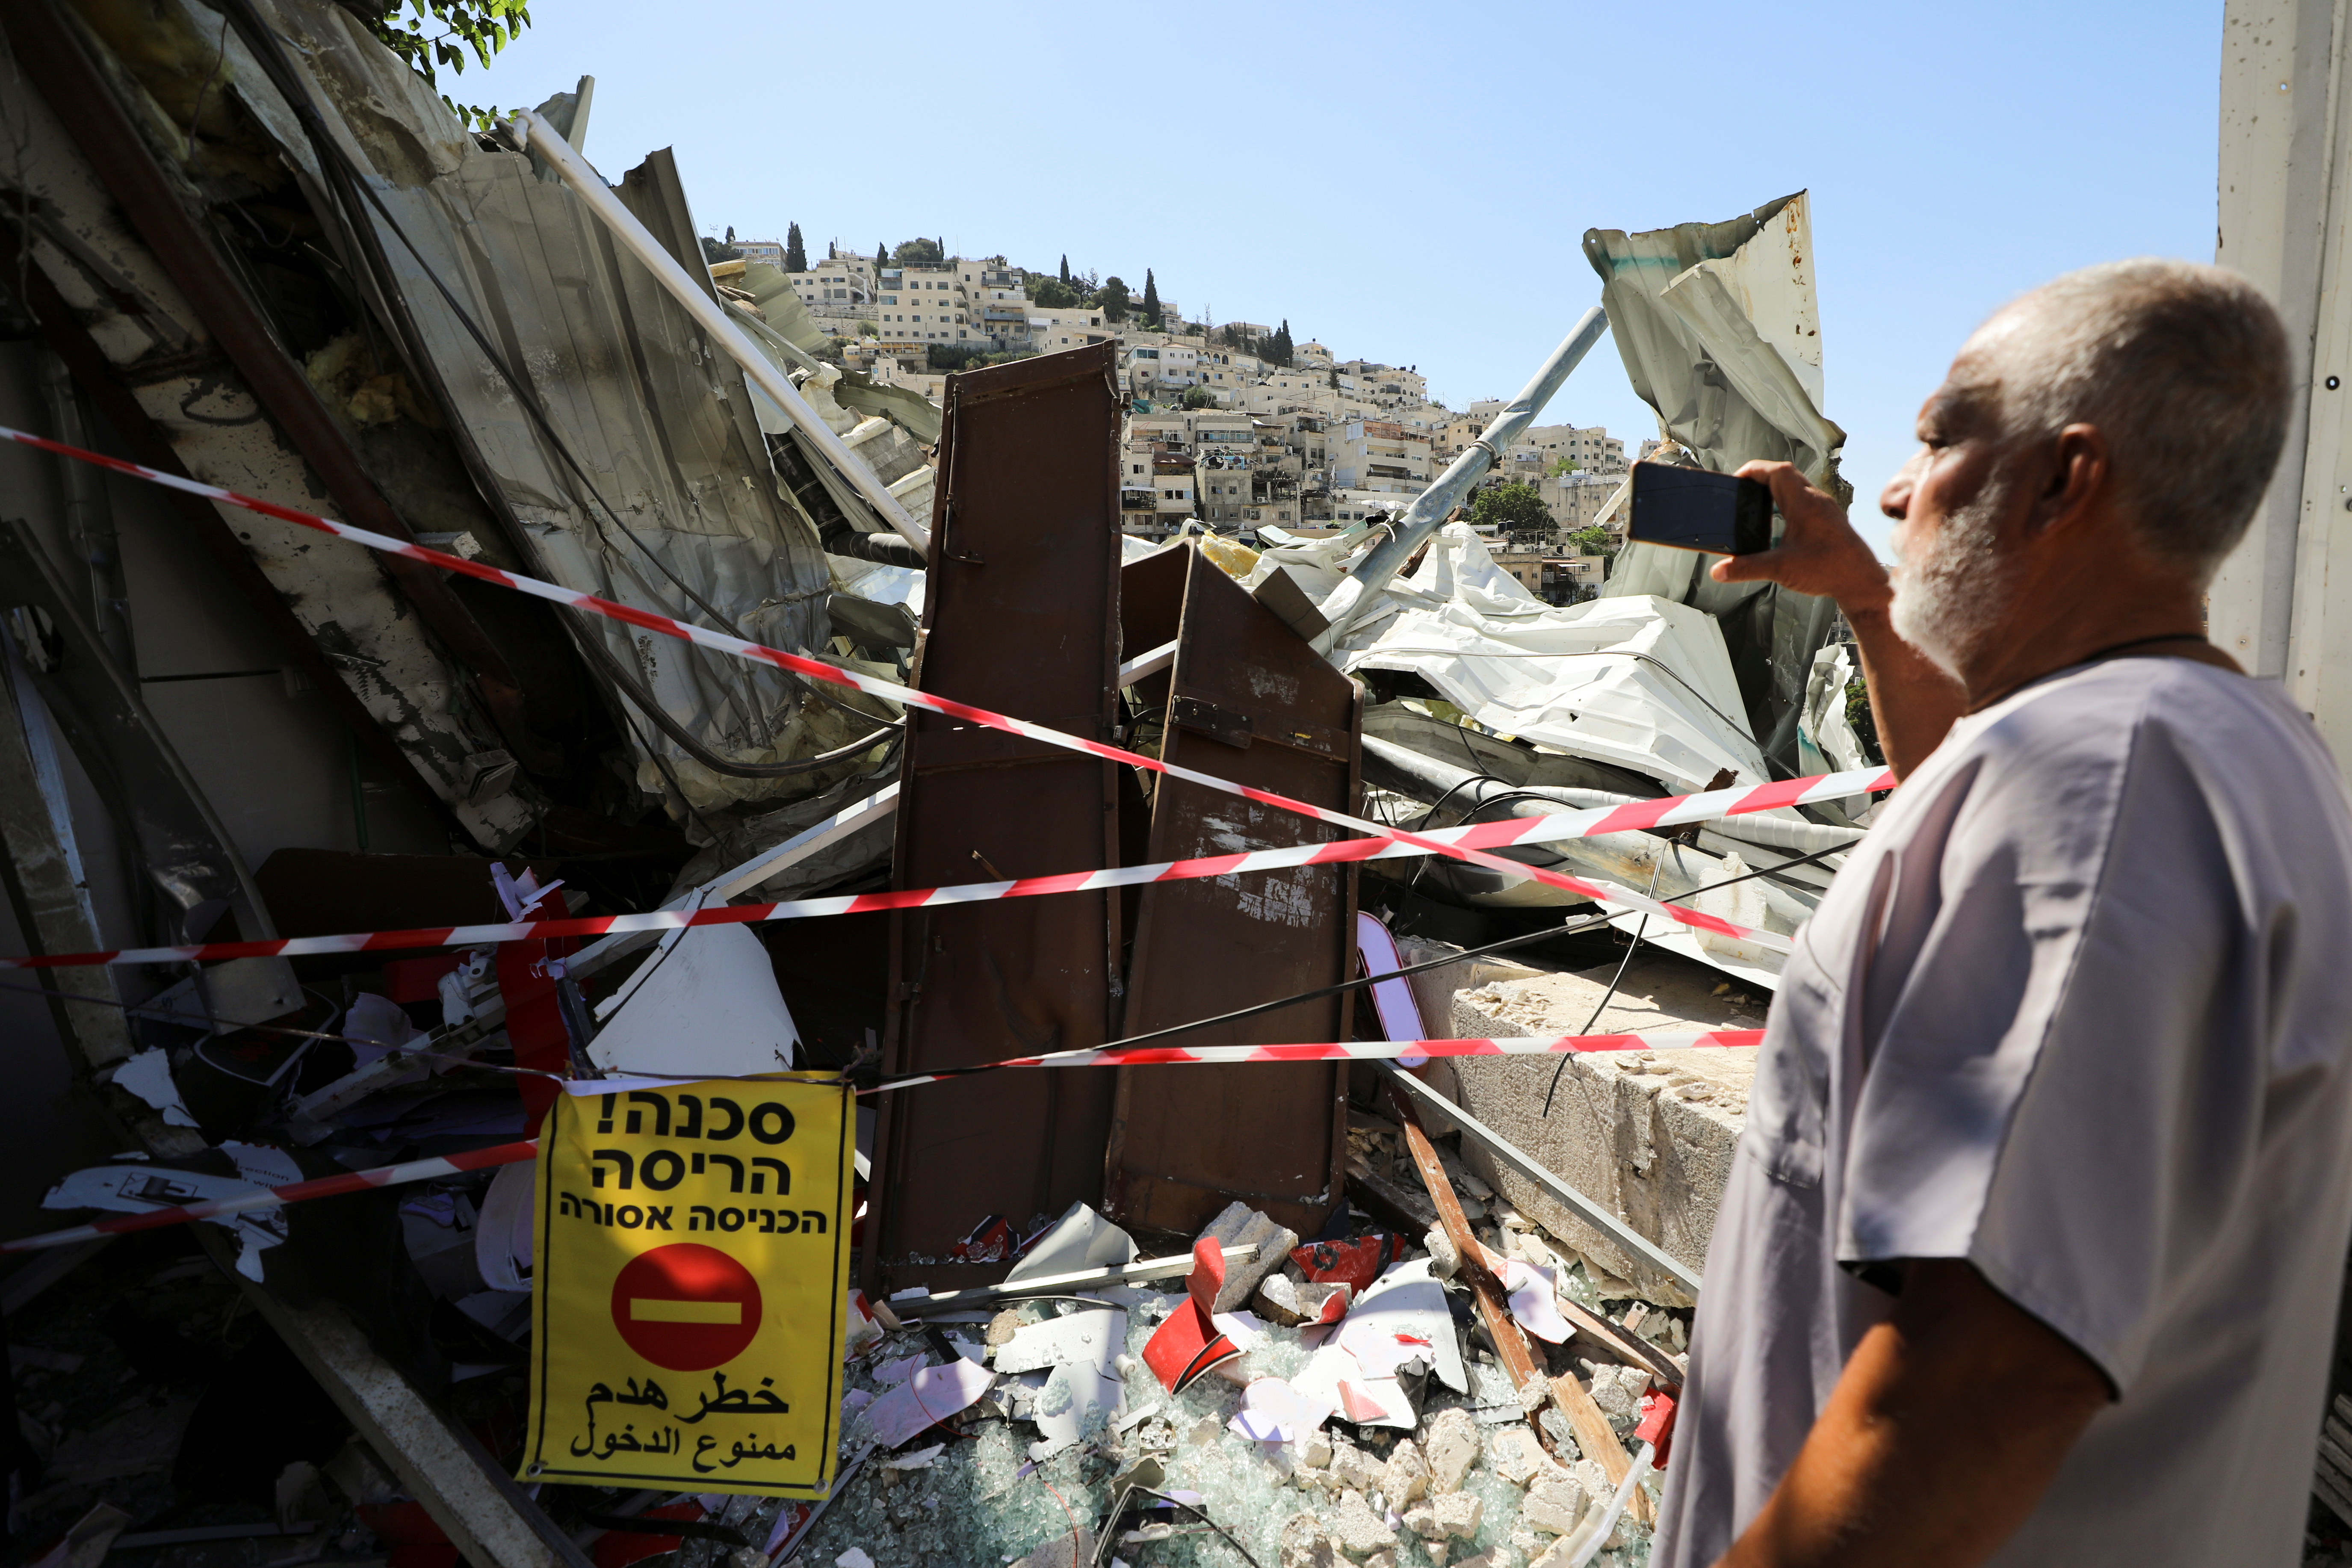 A Palestinian man uses his mobile phone as he stands near the debris of a shop that Israel demolished in the Palestinian neighbourhood of Silwan in East Jerusalem